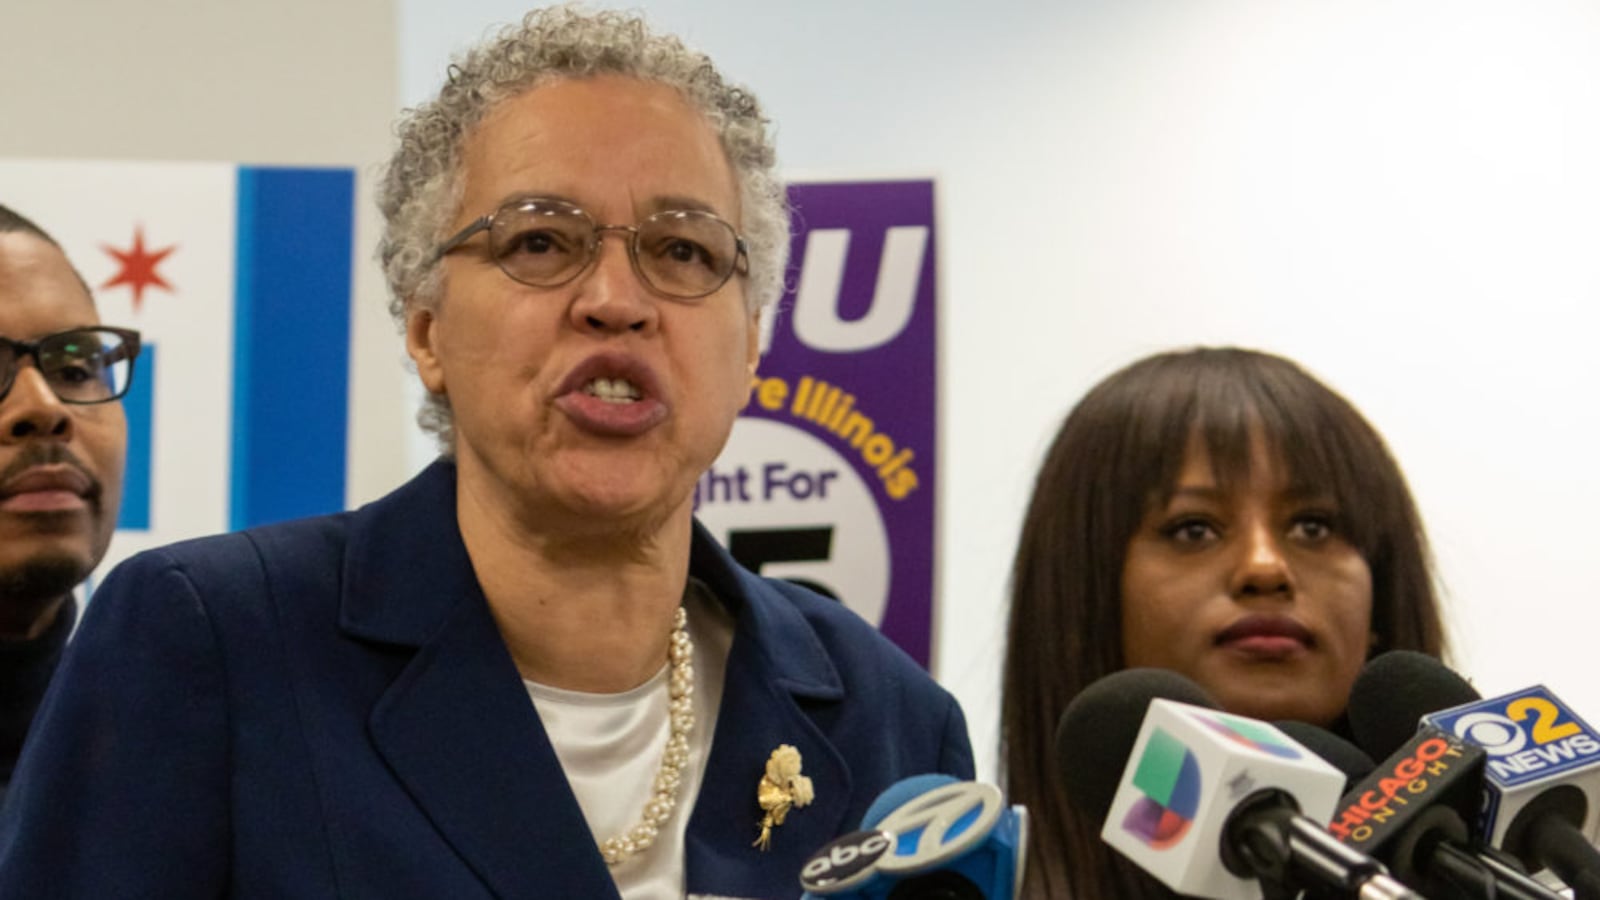 Cook County Board President Toni Preckwinkle speaks at a press conference in December, where she received endorsements from several public worker unions, including the Chicago Teachers Union, whose Vice President Stacy Davis Gates stands just to Preckwinkle's right in this picture.